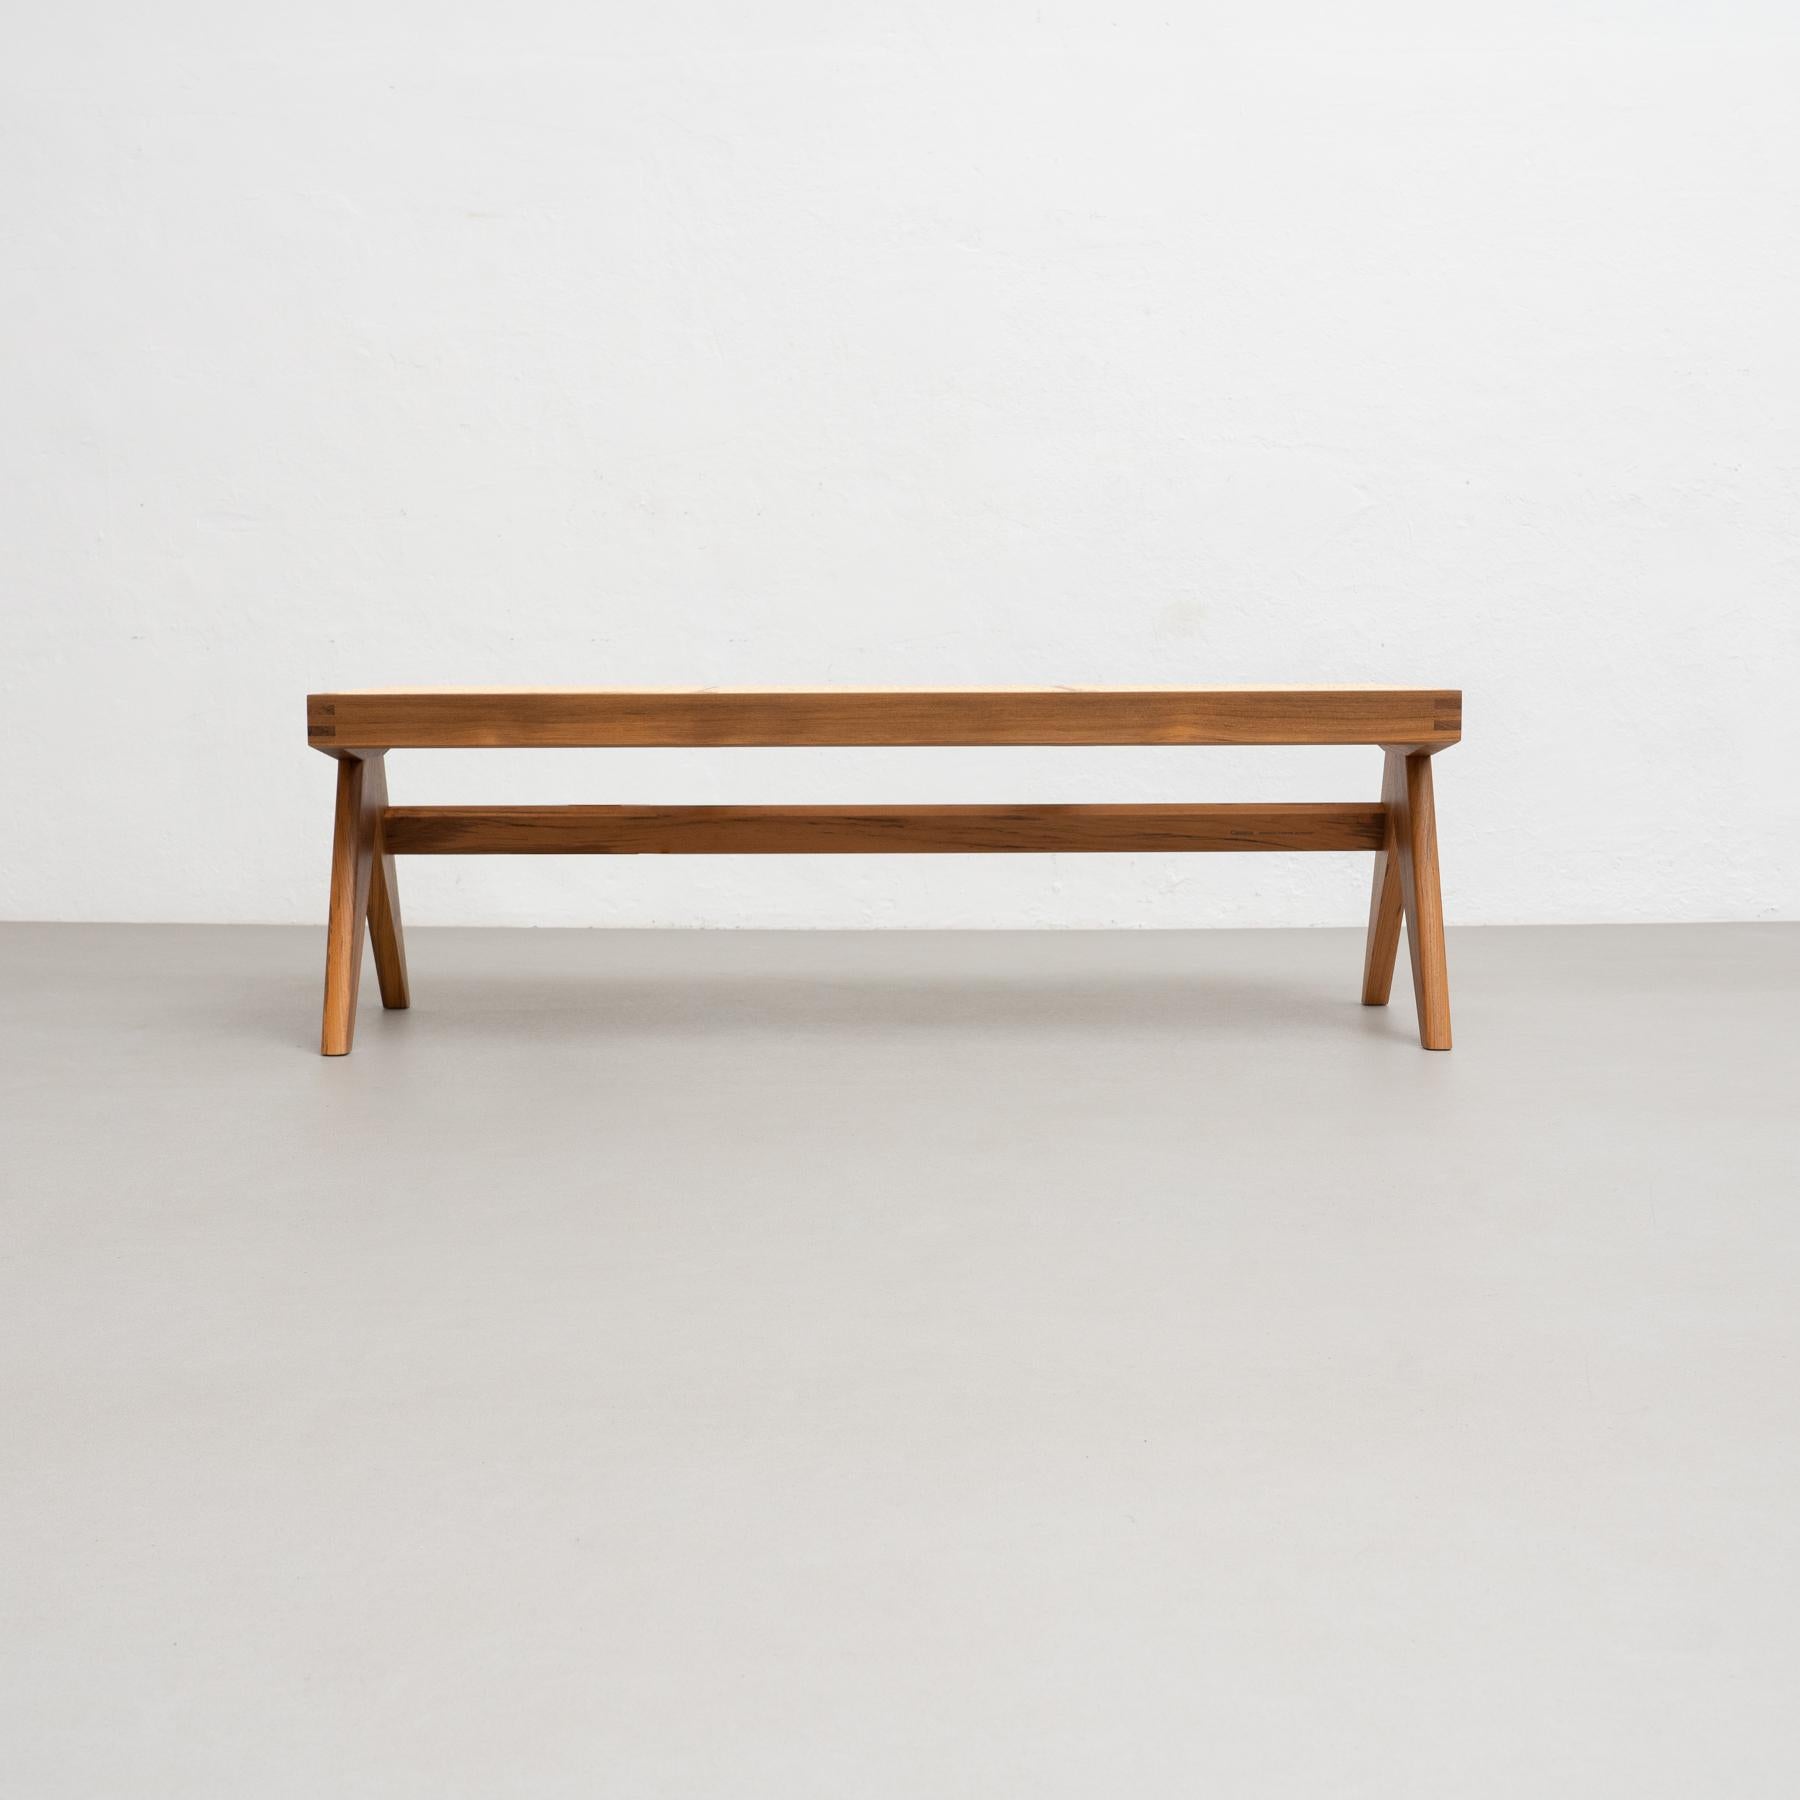 Pierre Jeanneret 057 Civil Bench, Wood and Woven Viennese Cane by Cassina In New Condition For Sale In Barcelona, Barcelona